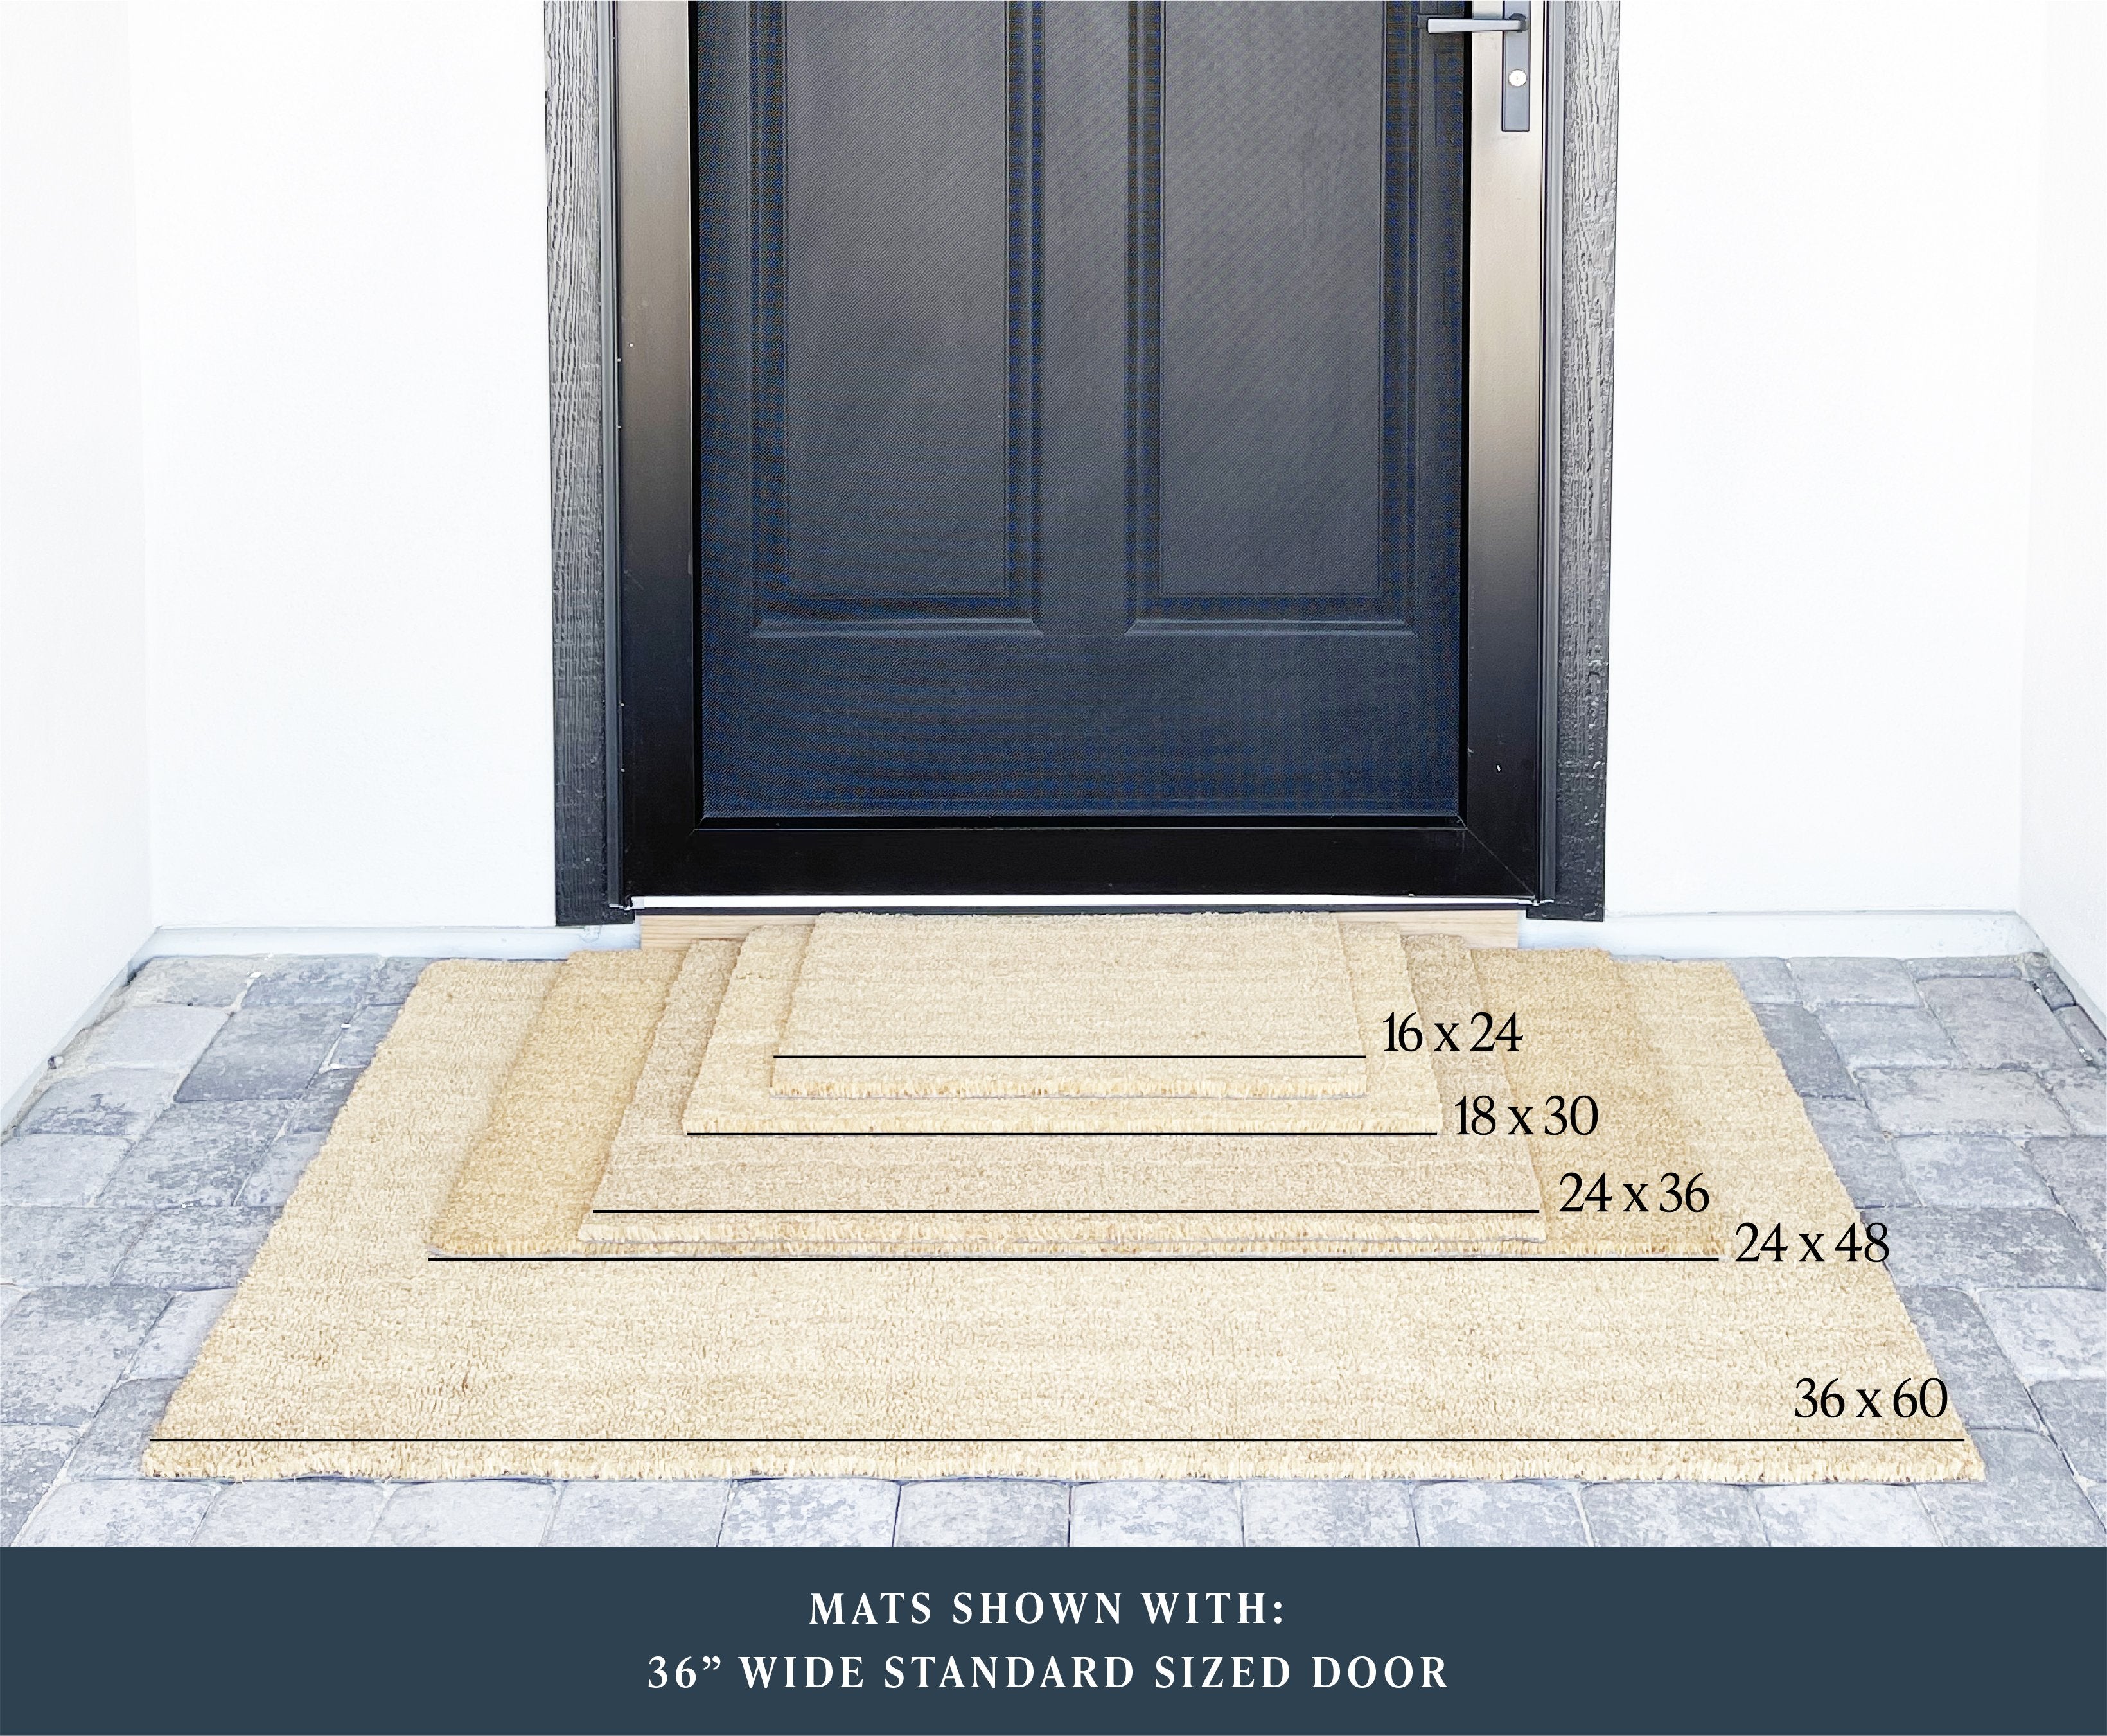 Christmas Vacation Nuthouse Doormat